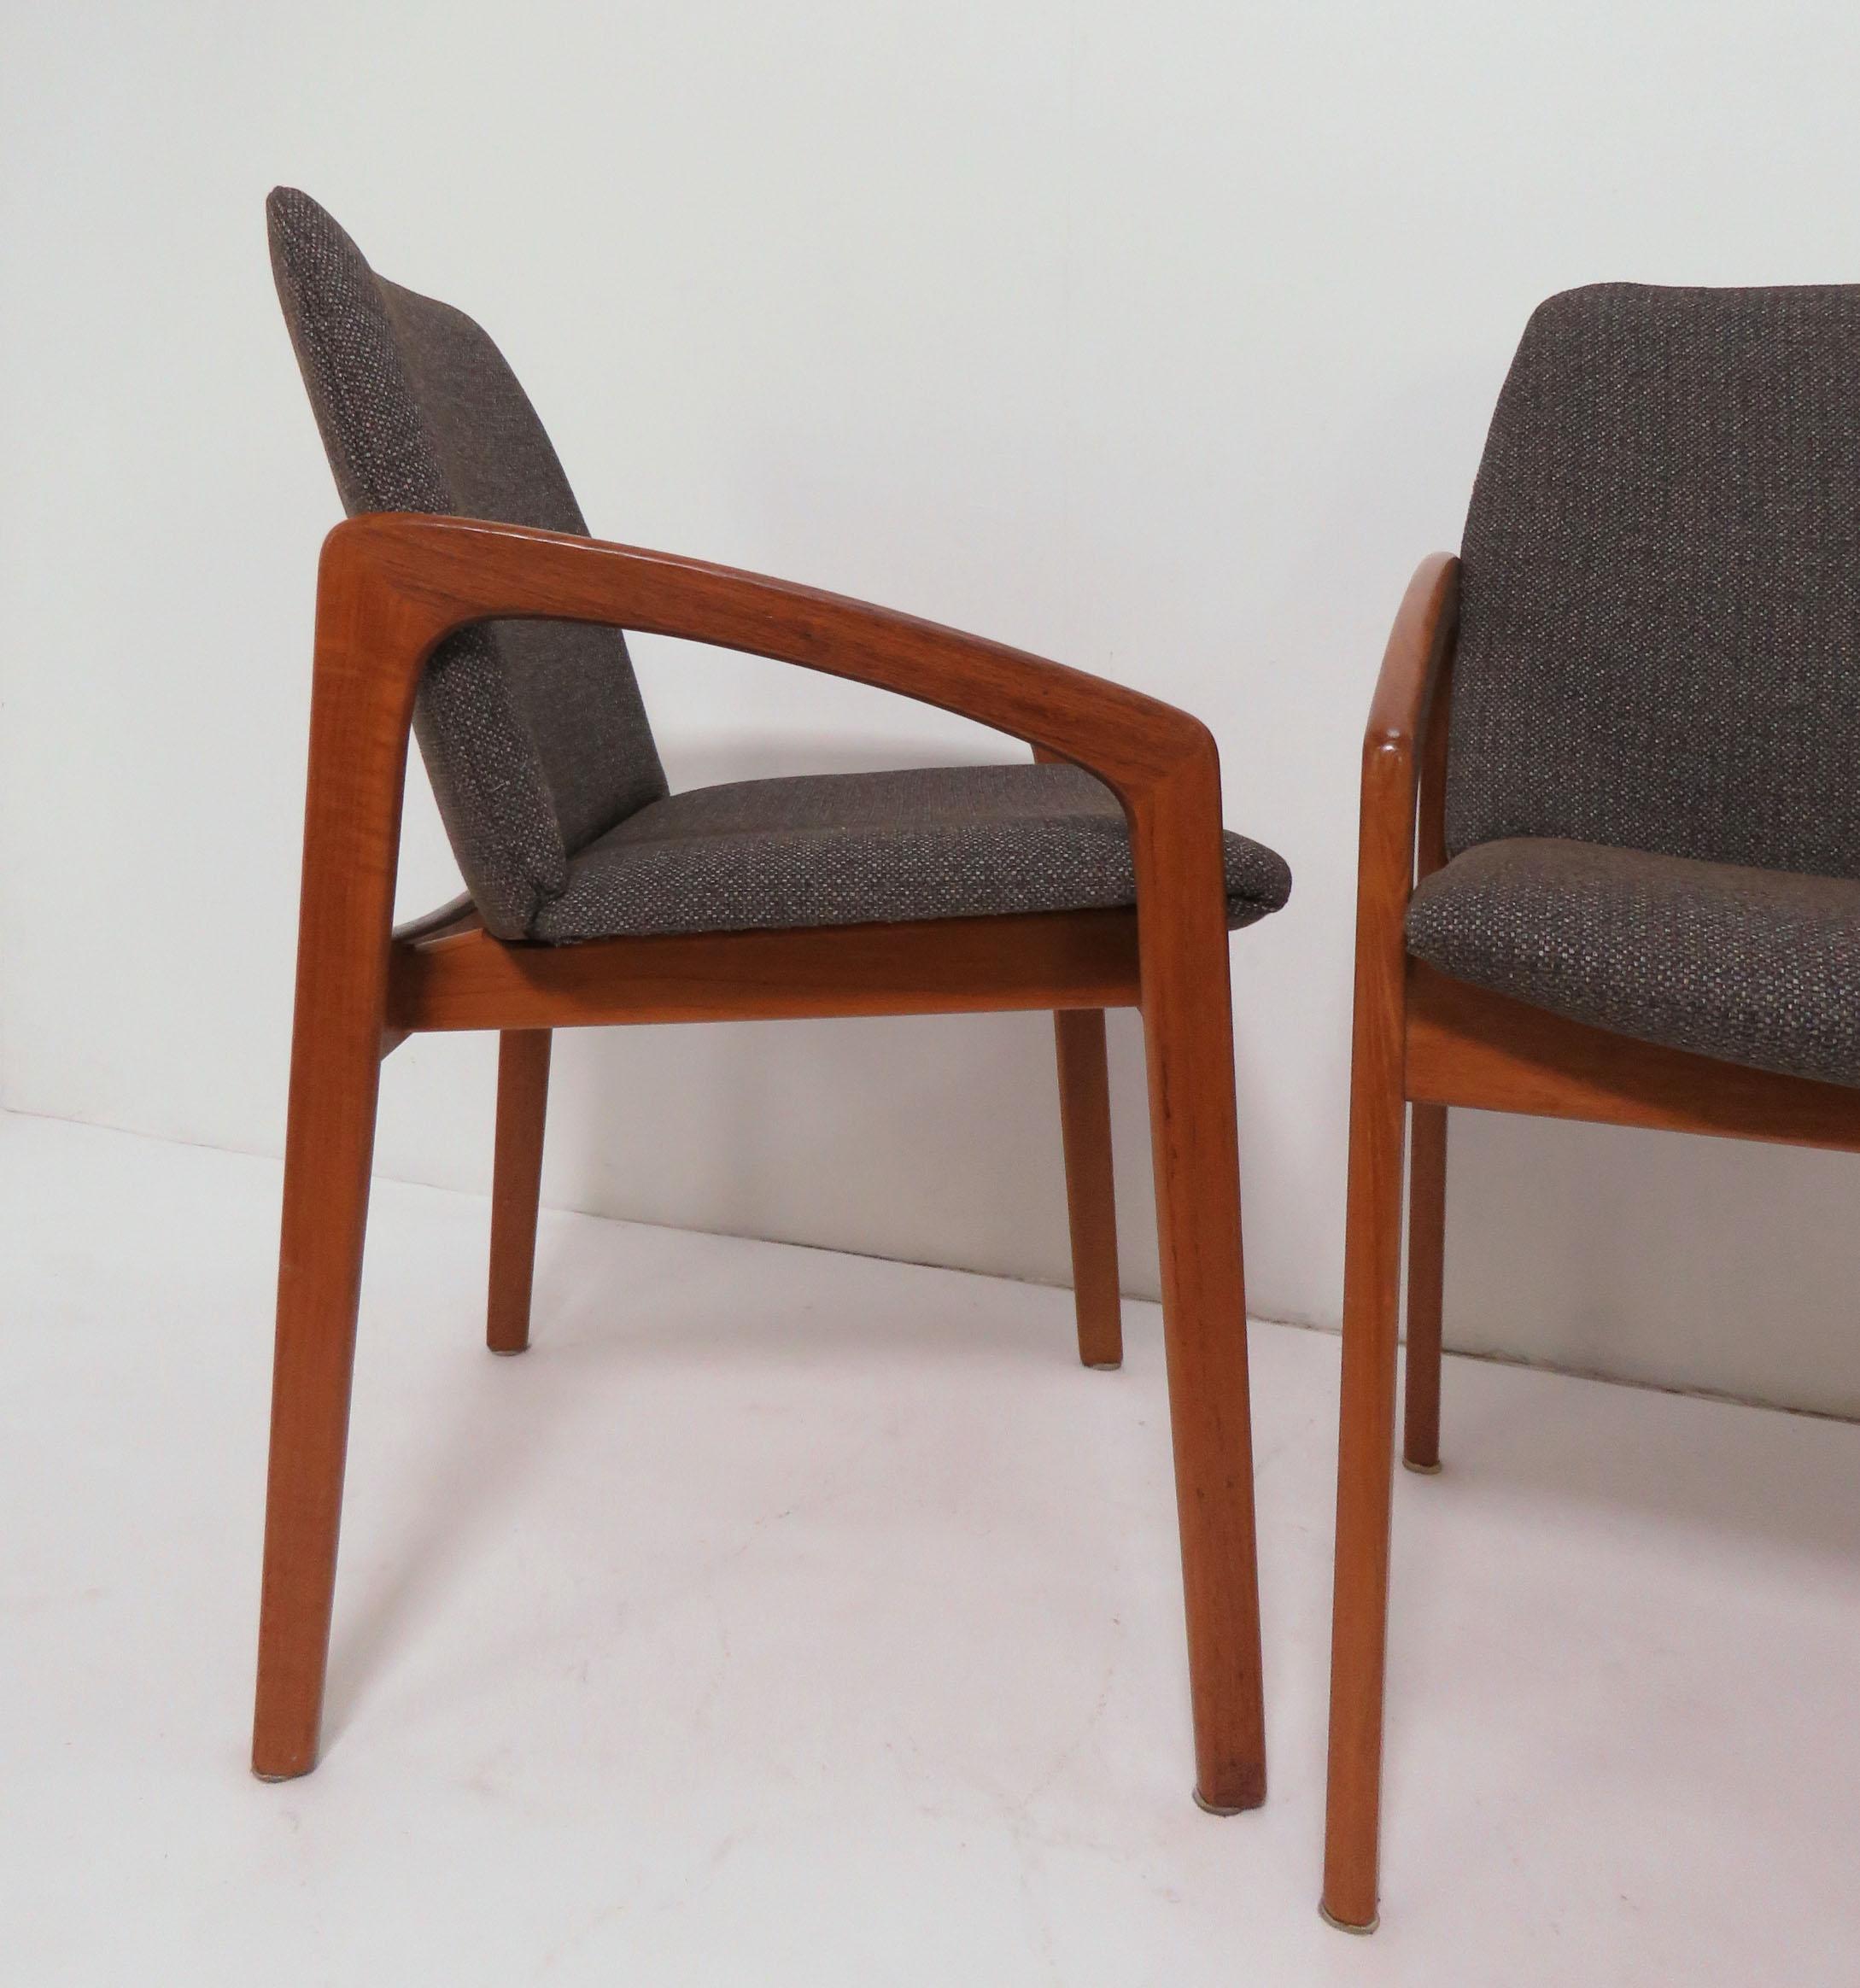 Set of six teak dining chairs with down swept canted arms by Kai Kristiansen for K.S. Mobler, Denmark, circa 1960s.